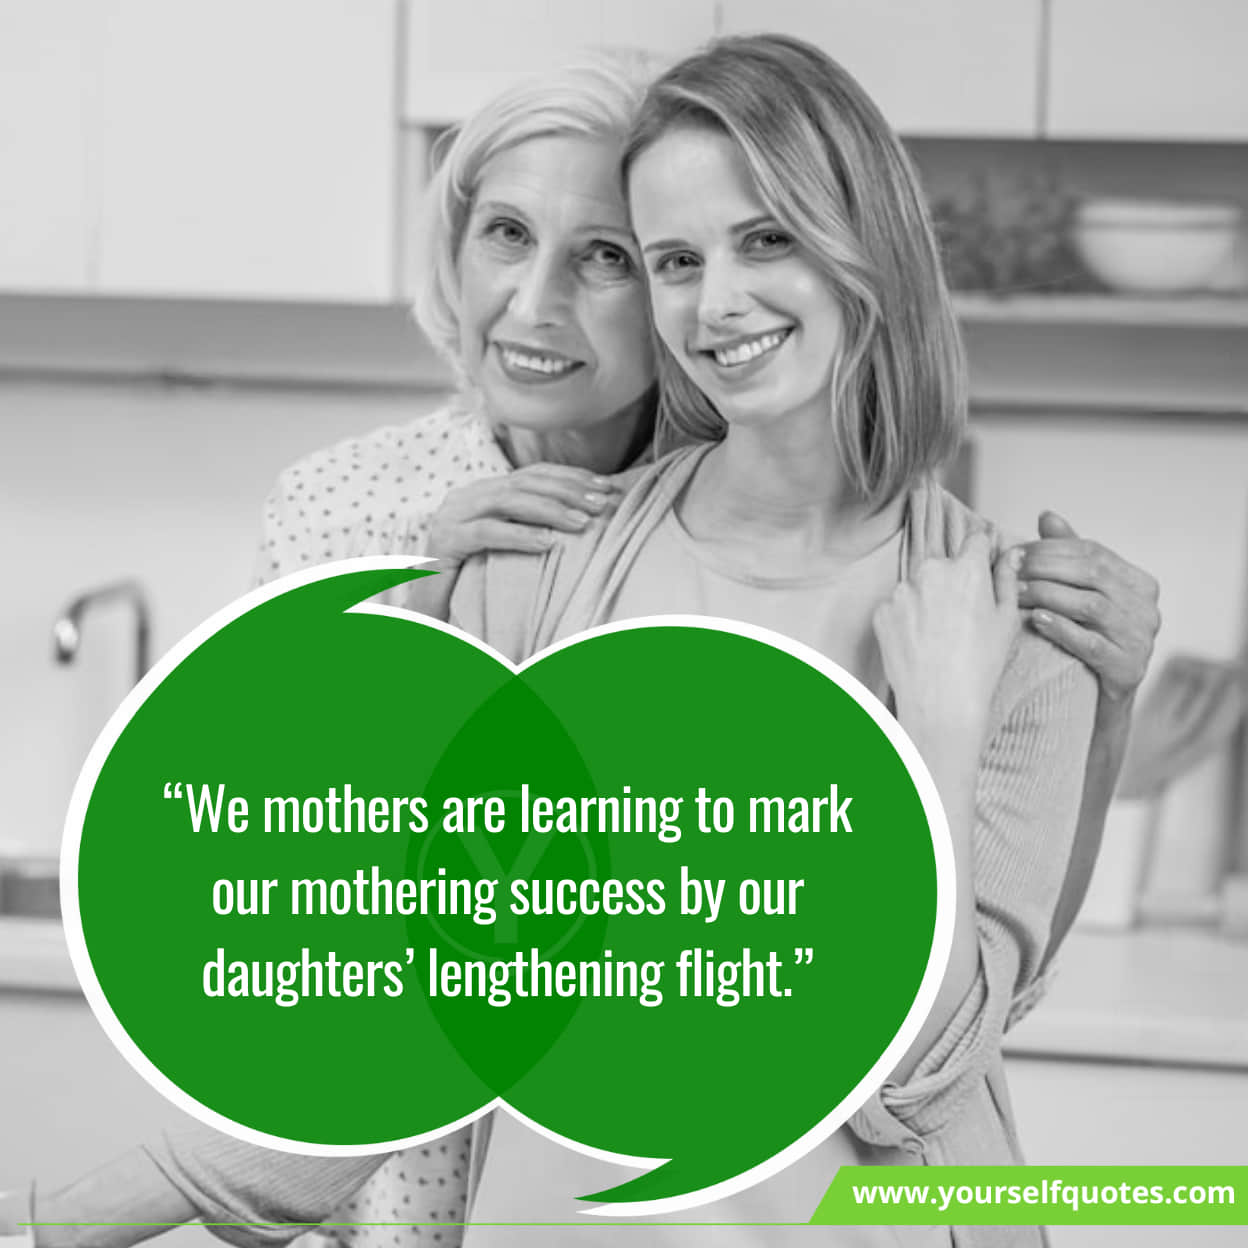 Mother-Daughter Quotes About Motherhood